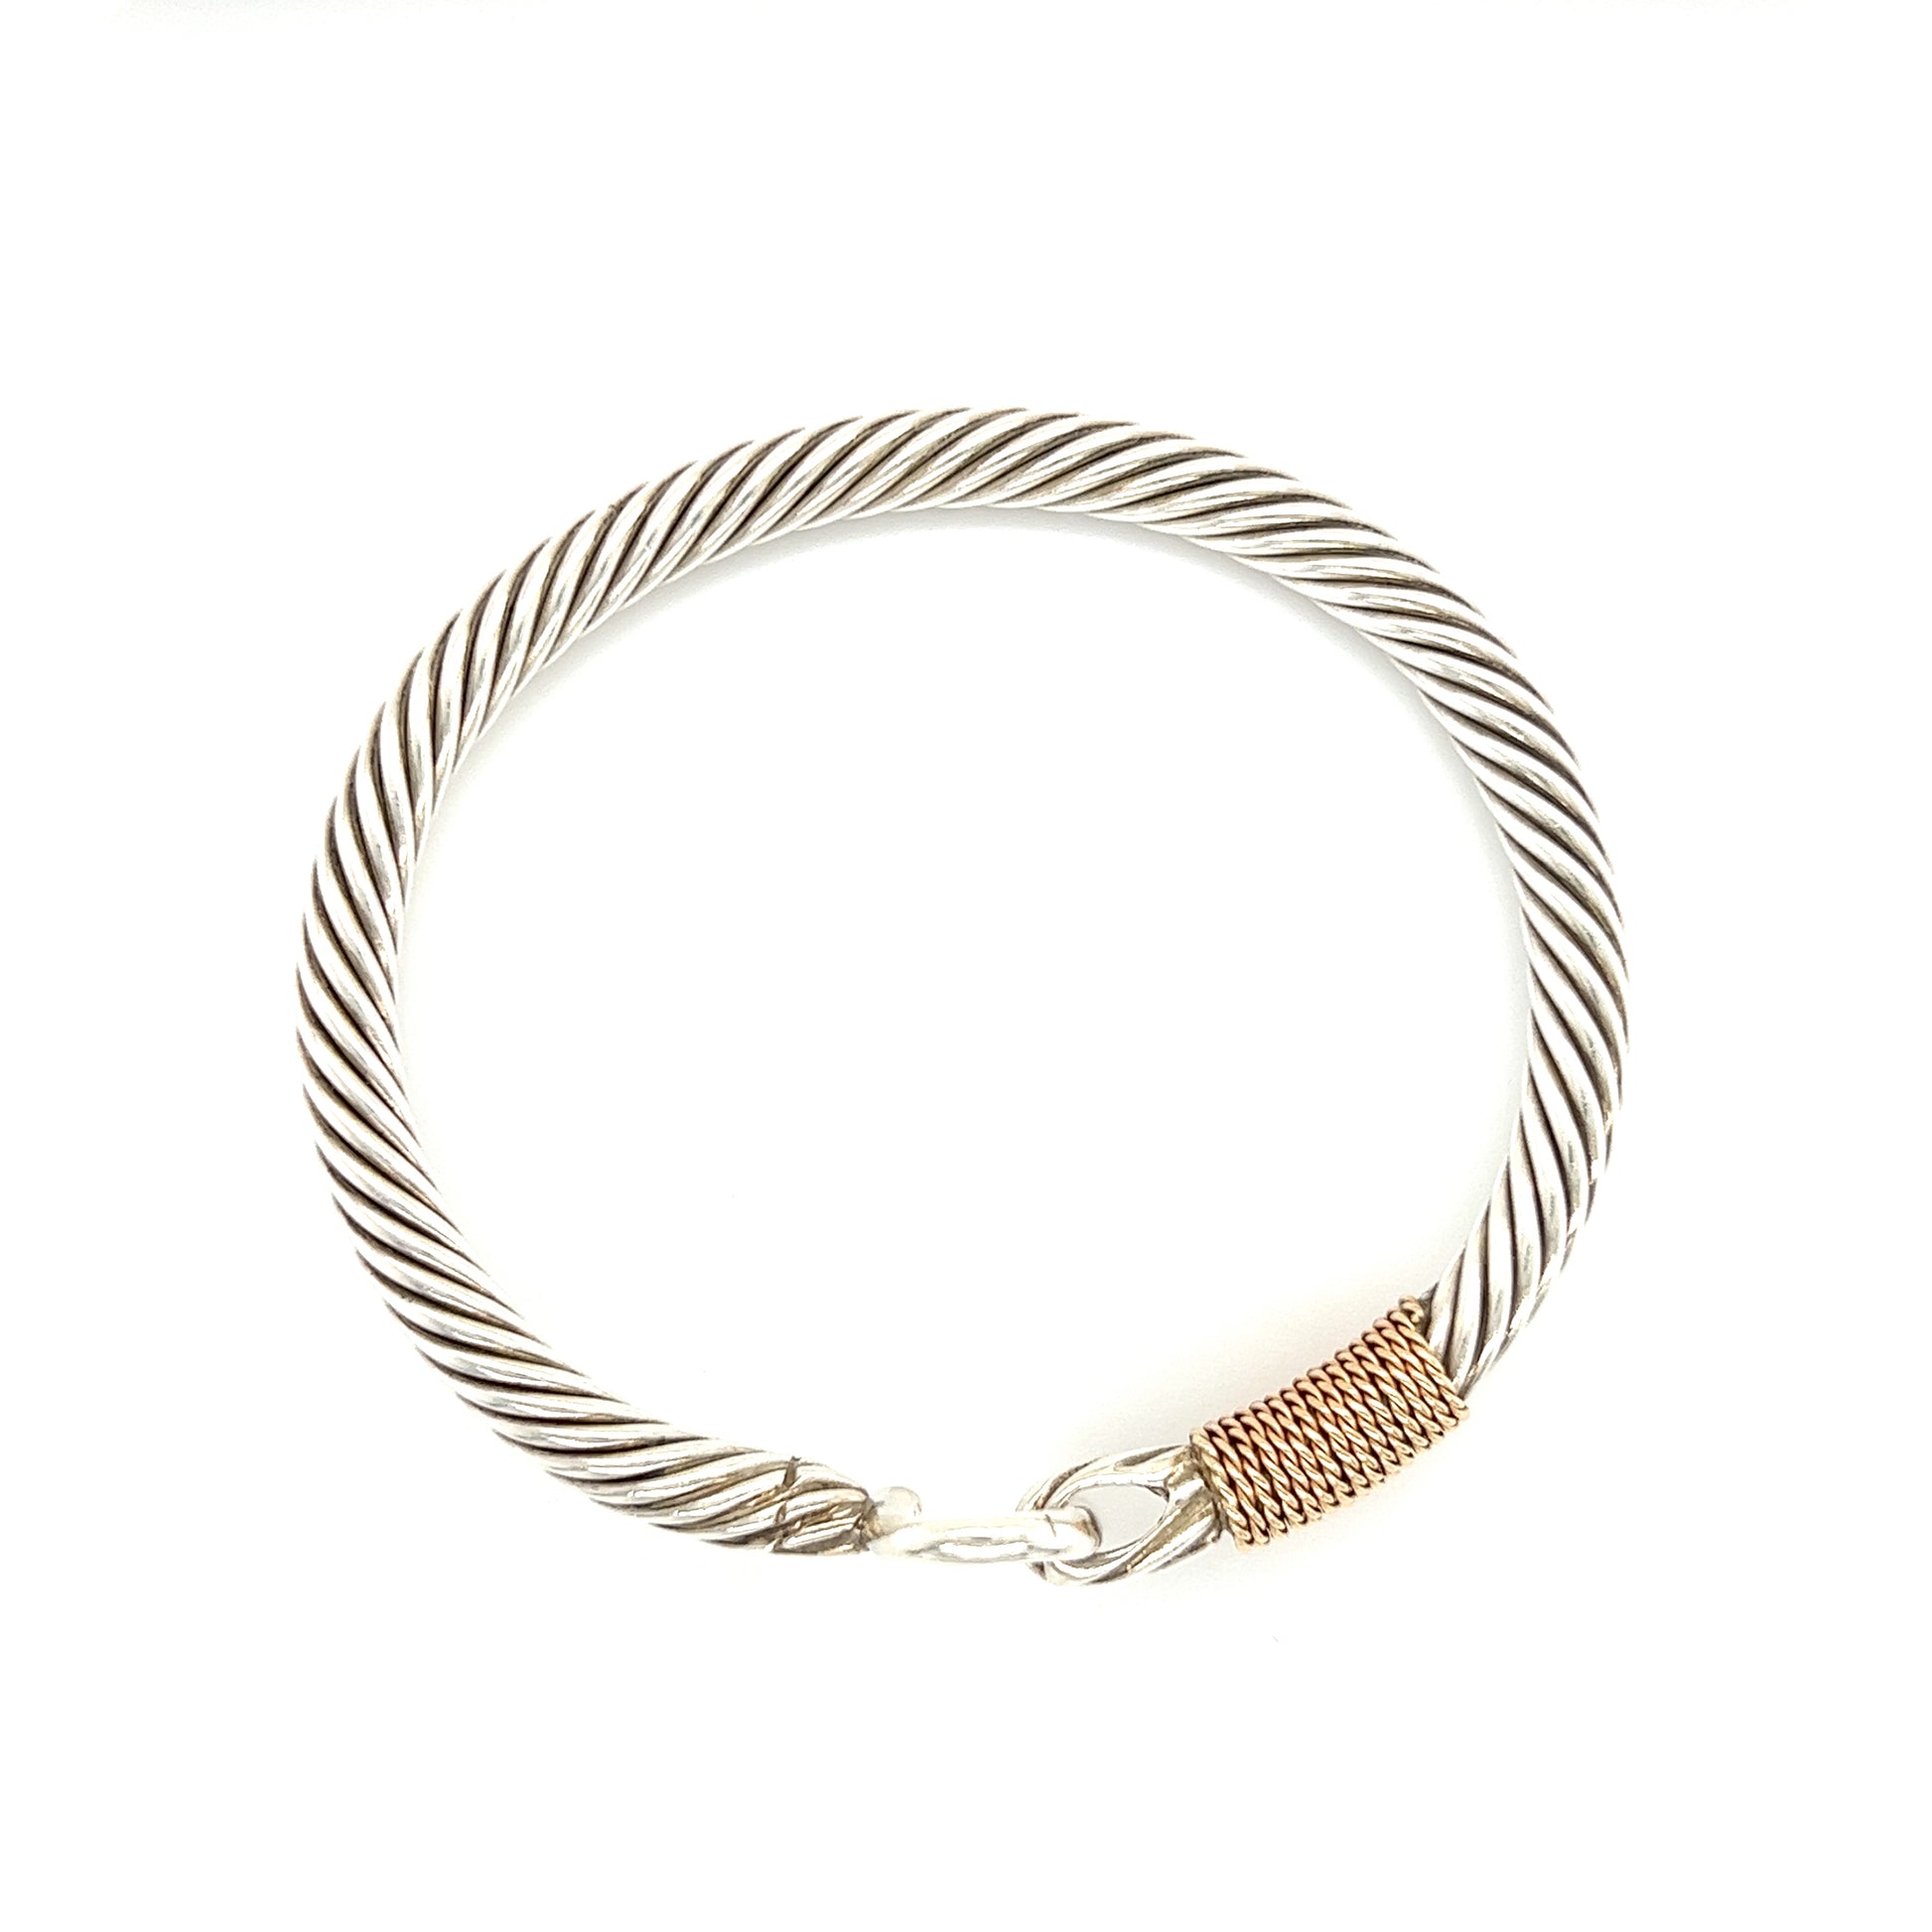 U Cable 5mm Bangle Bracelet with 14K Yellow Gold Wrap in Sterling Silver Top View